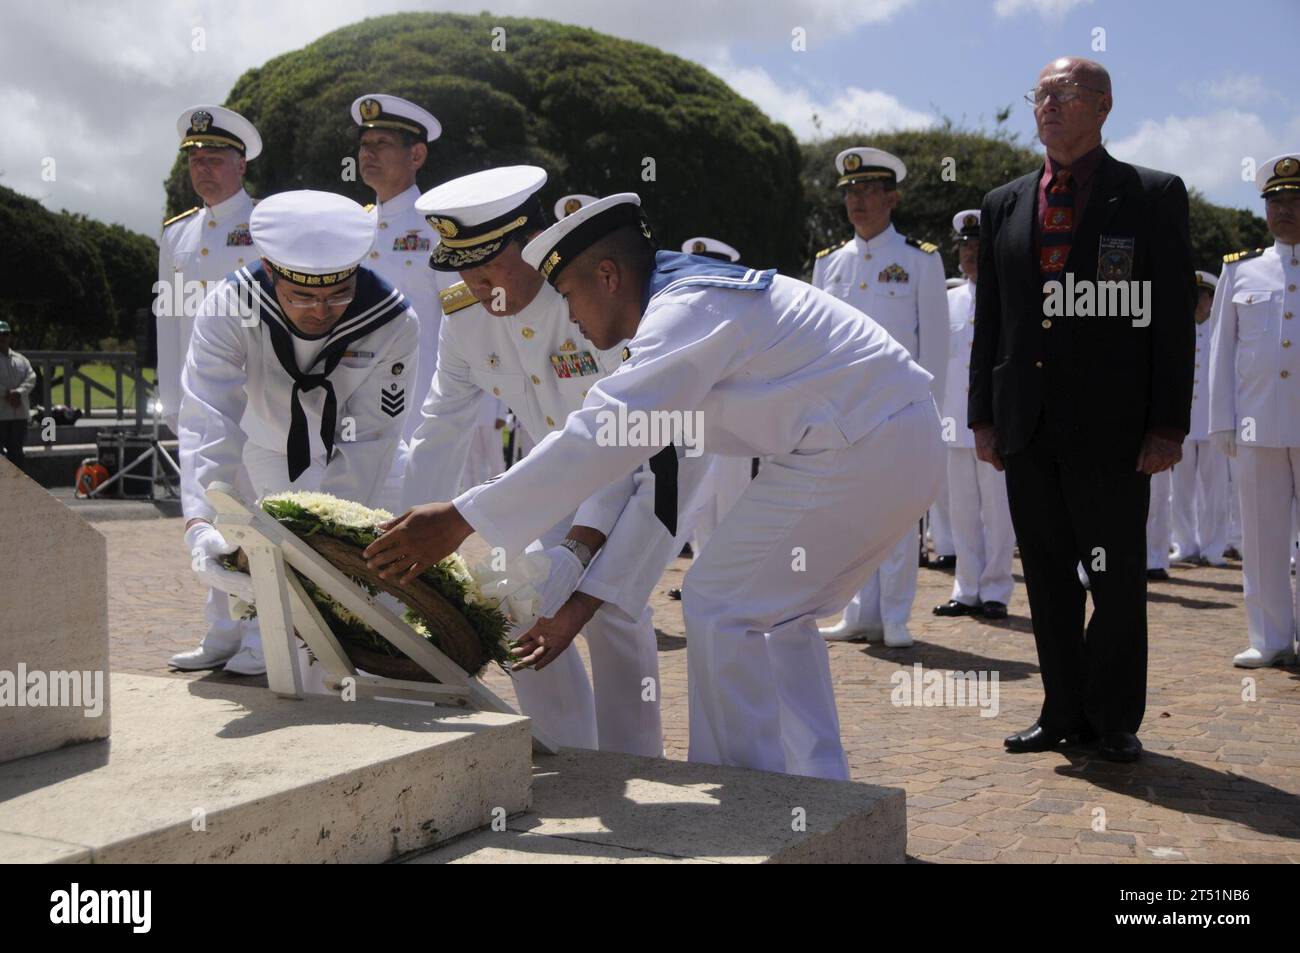 1006097498L-193 HONOLULU (June 9, 2010) Japan Maritime Self-Defense Force Rear Adm. Tomohisa Takei lays a wreath at the National Memorial Cemetery of the Pacific at the Puowaina Crater. The Japan Maritime Self-Defense Force Training Squadron arrived at Joint Base Pearl Harbor-Hickam to participate in various professional exchanges and social events with U.S. counterparts. This year marks the 50th anniversary of the U.S. and Japan Treaty of Mutual Cooperation of Security that in 1960 established the alliance between the two countries. Navy Stock Photo